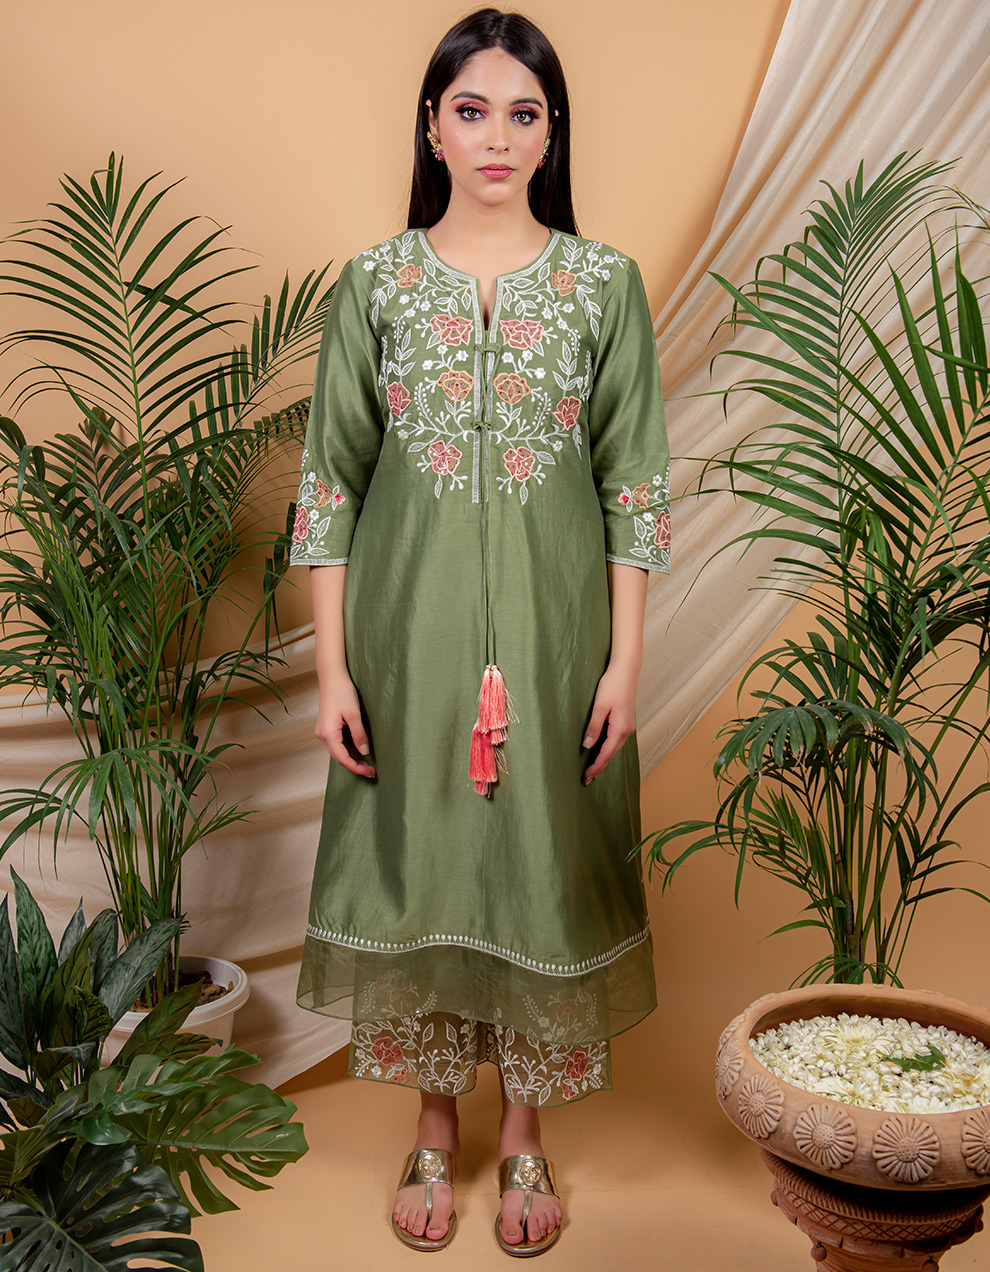 green-Green-chanderi-silk-kurta-designs-for-ladies-in-India-at-the-best-prices-1